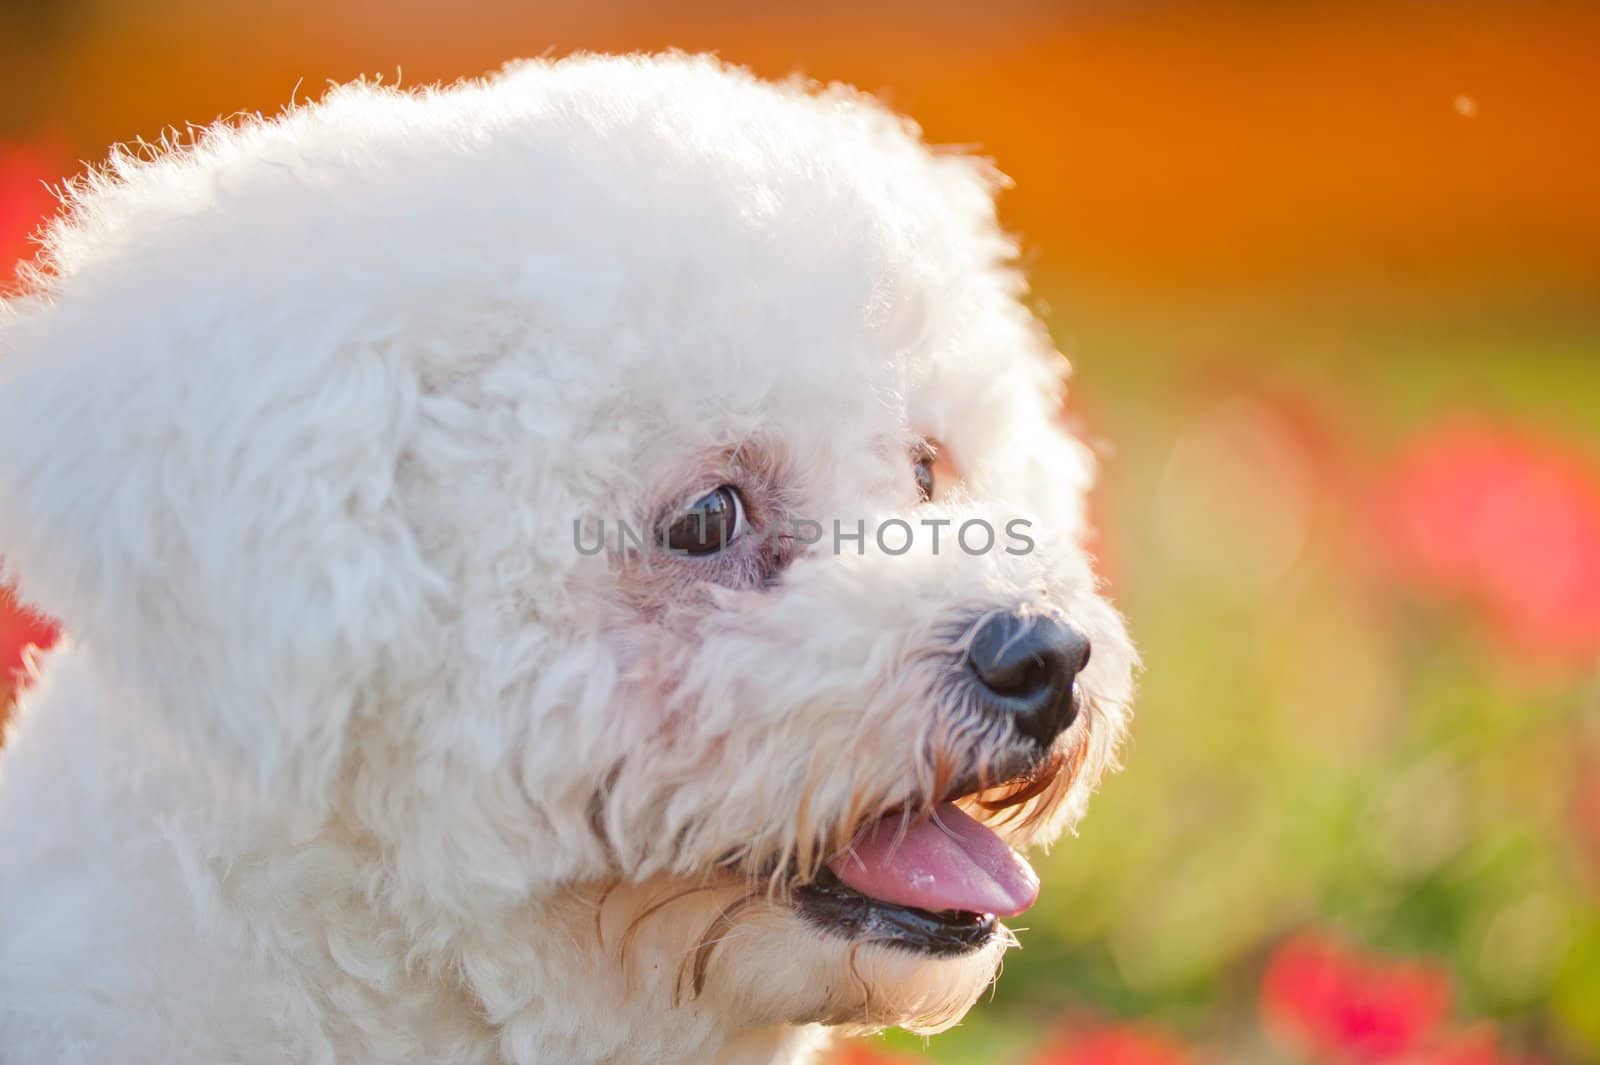 Poodle dog by raywoo